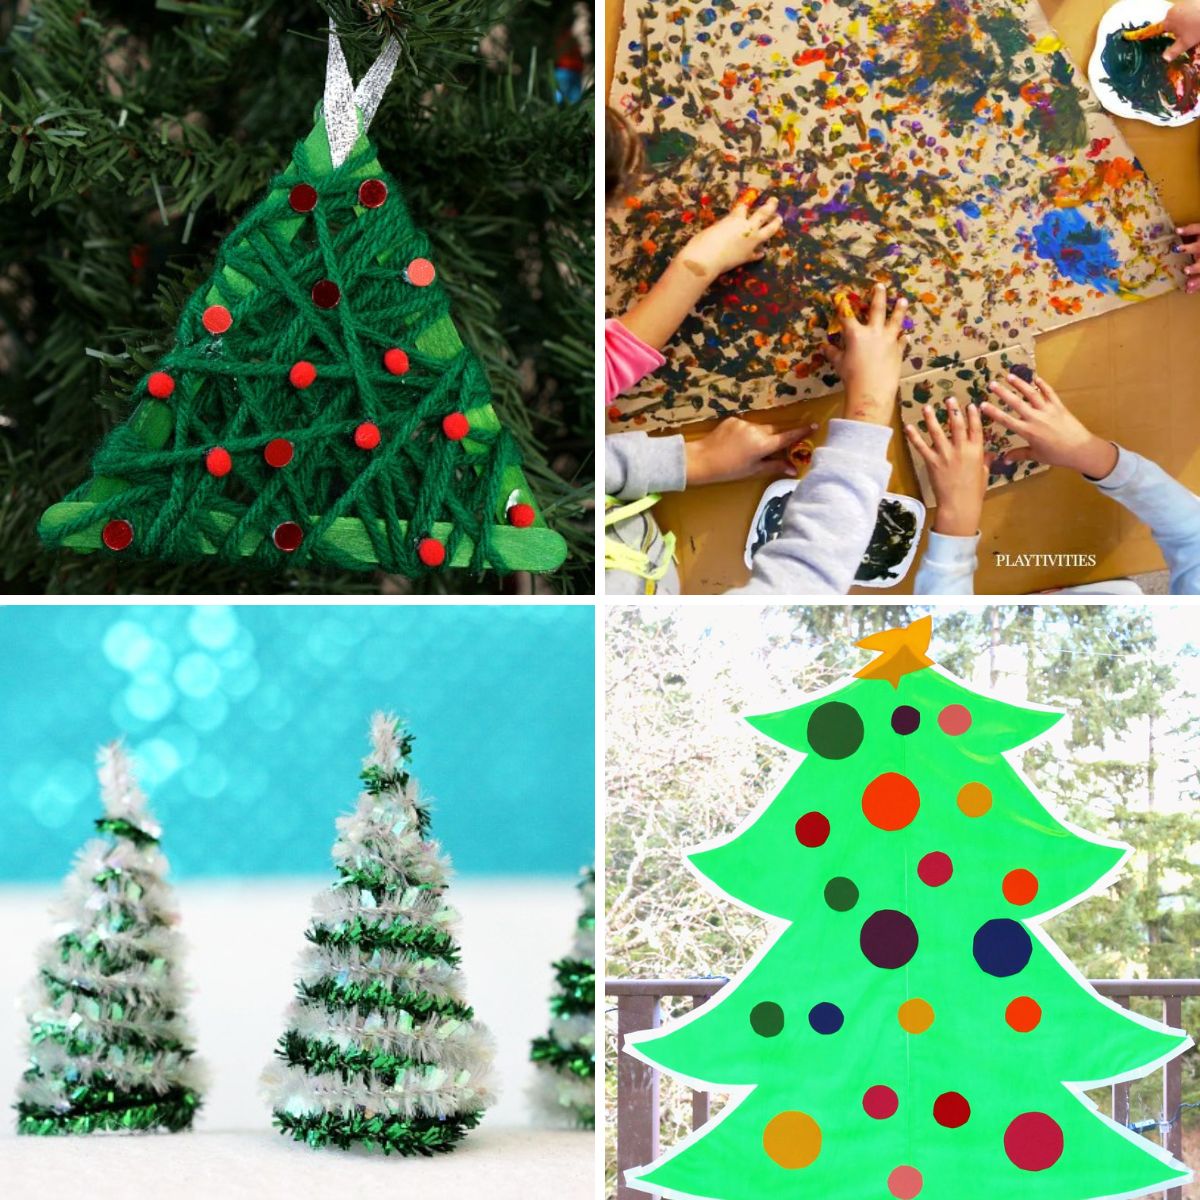 4 images of fun christmas crafts for kids.